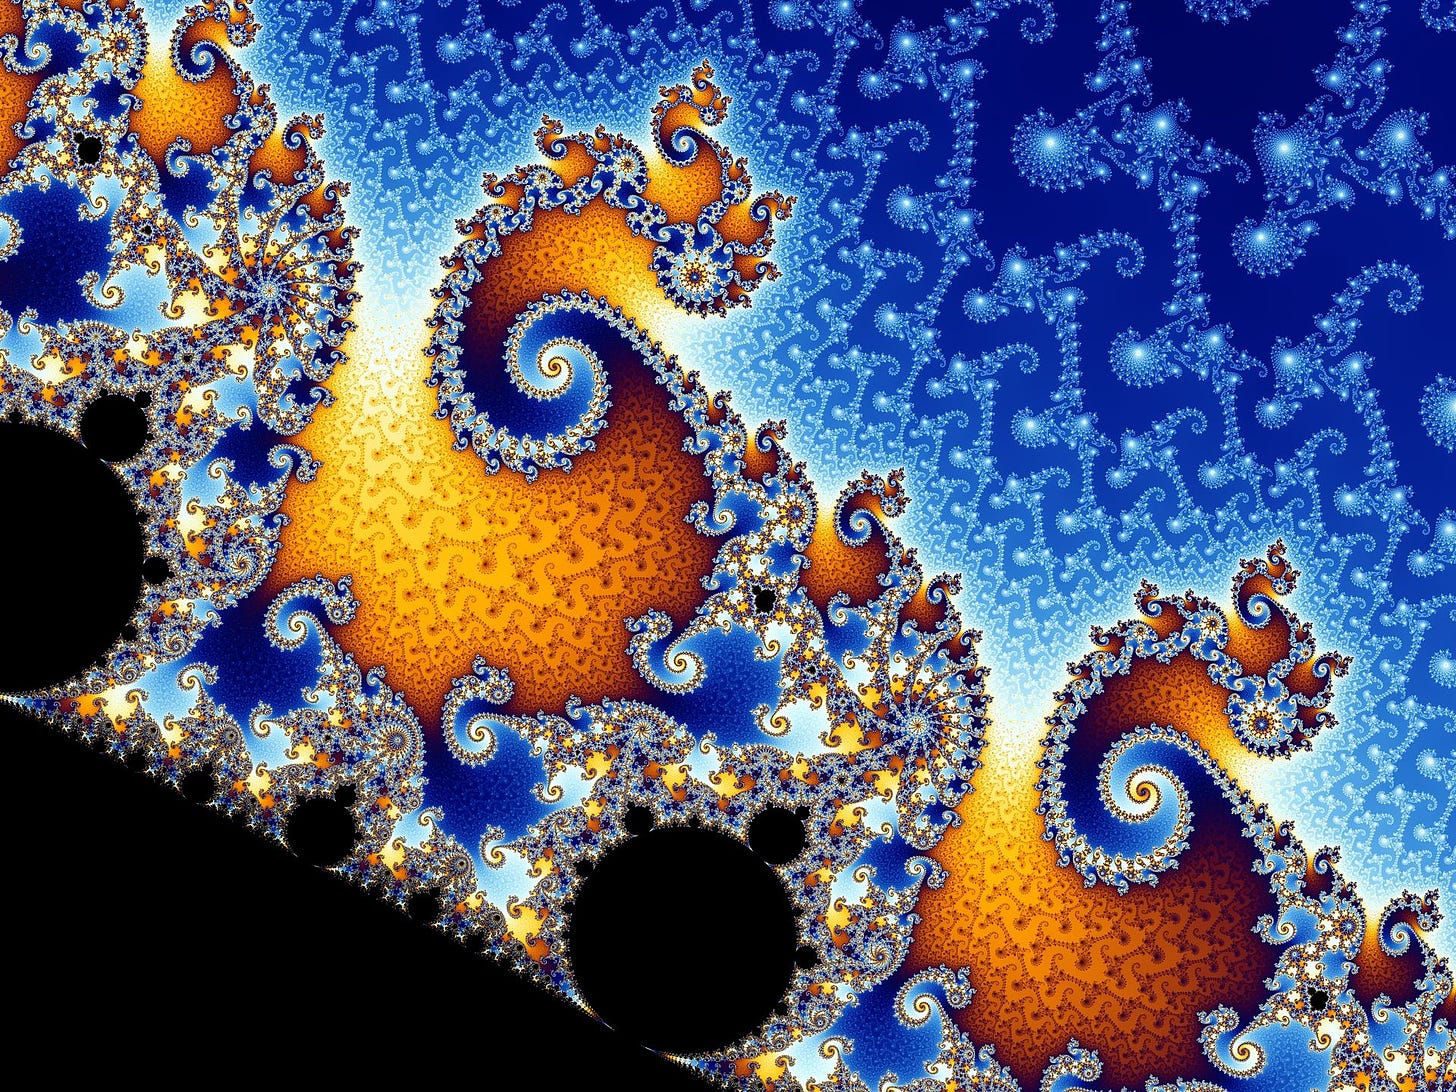 Double-spirals with satellites of second order – analogously to the "seahorses", the double-spirals may be interpreted as a metamorphosis of the "antenna".